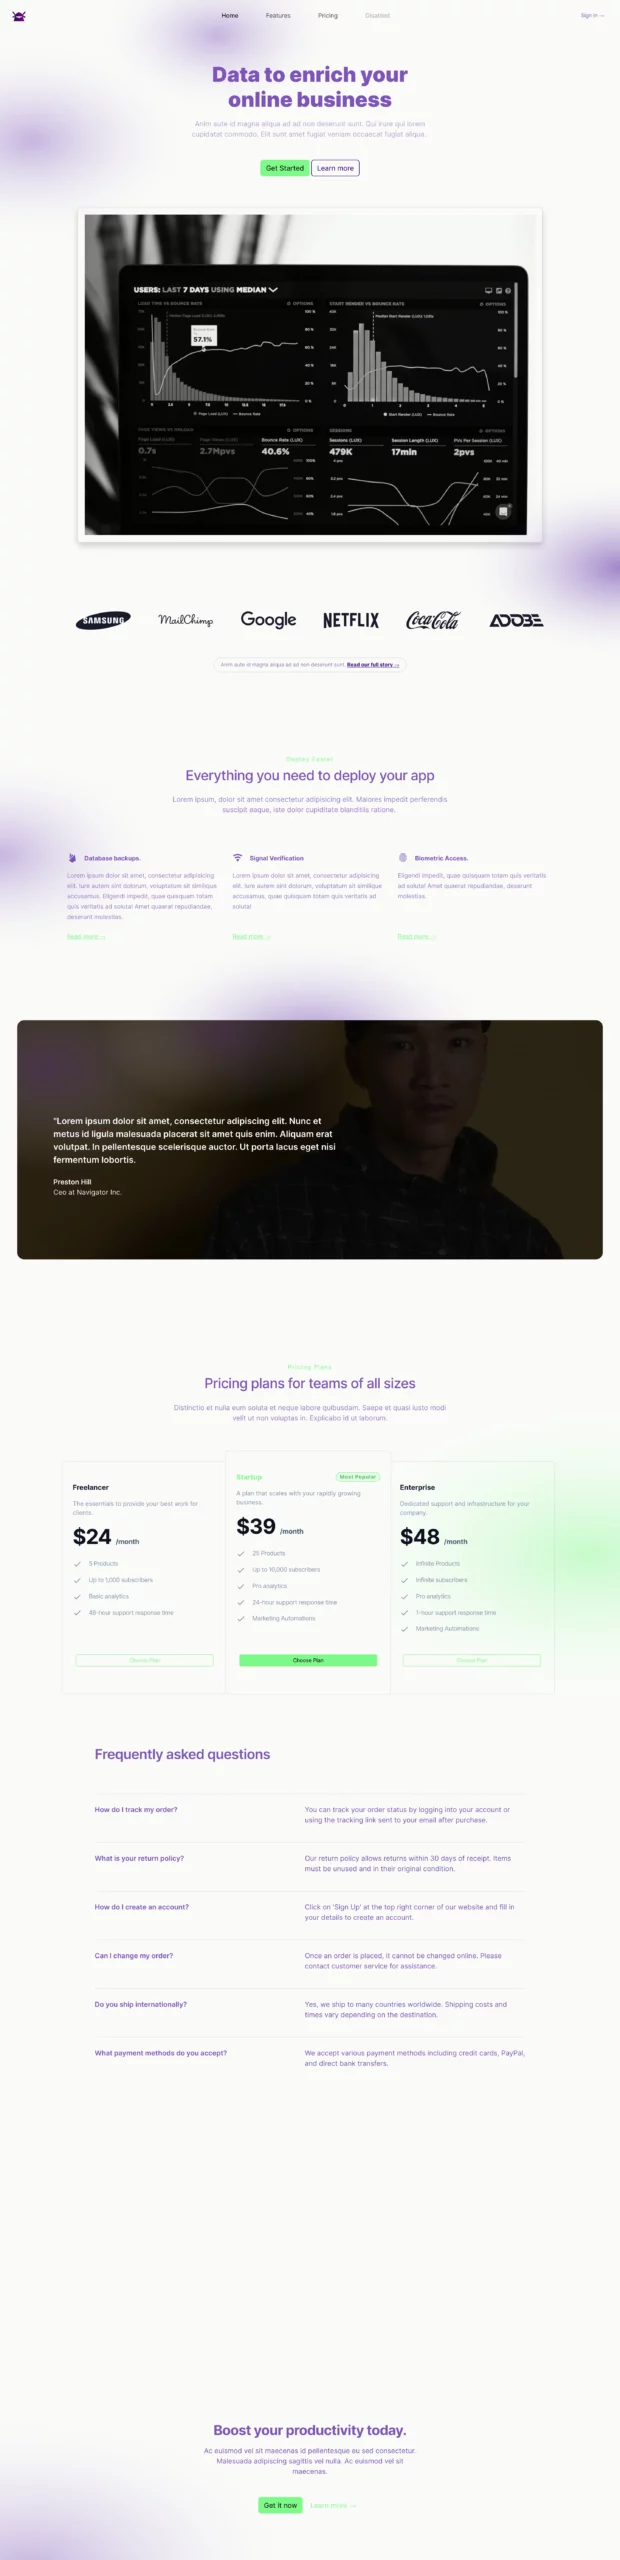 Landing Page 2 Bootstrap 5 components